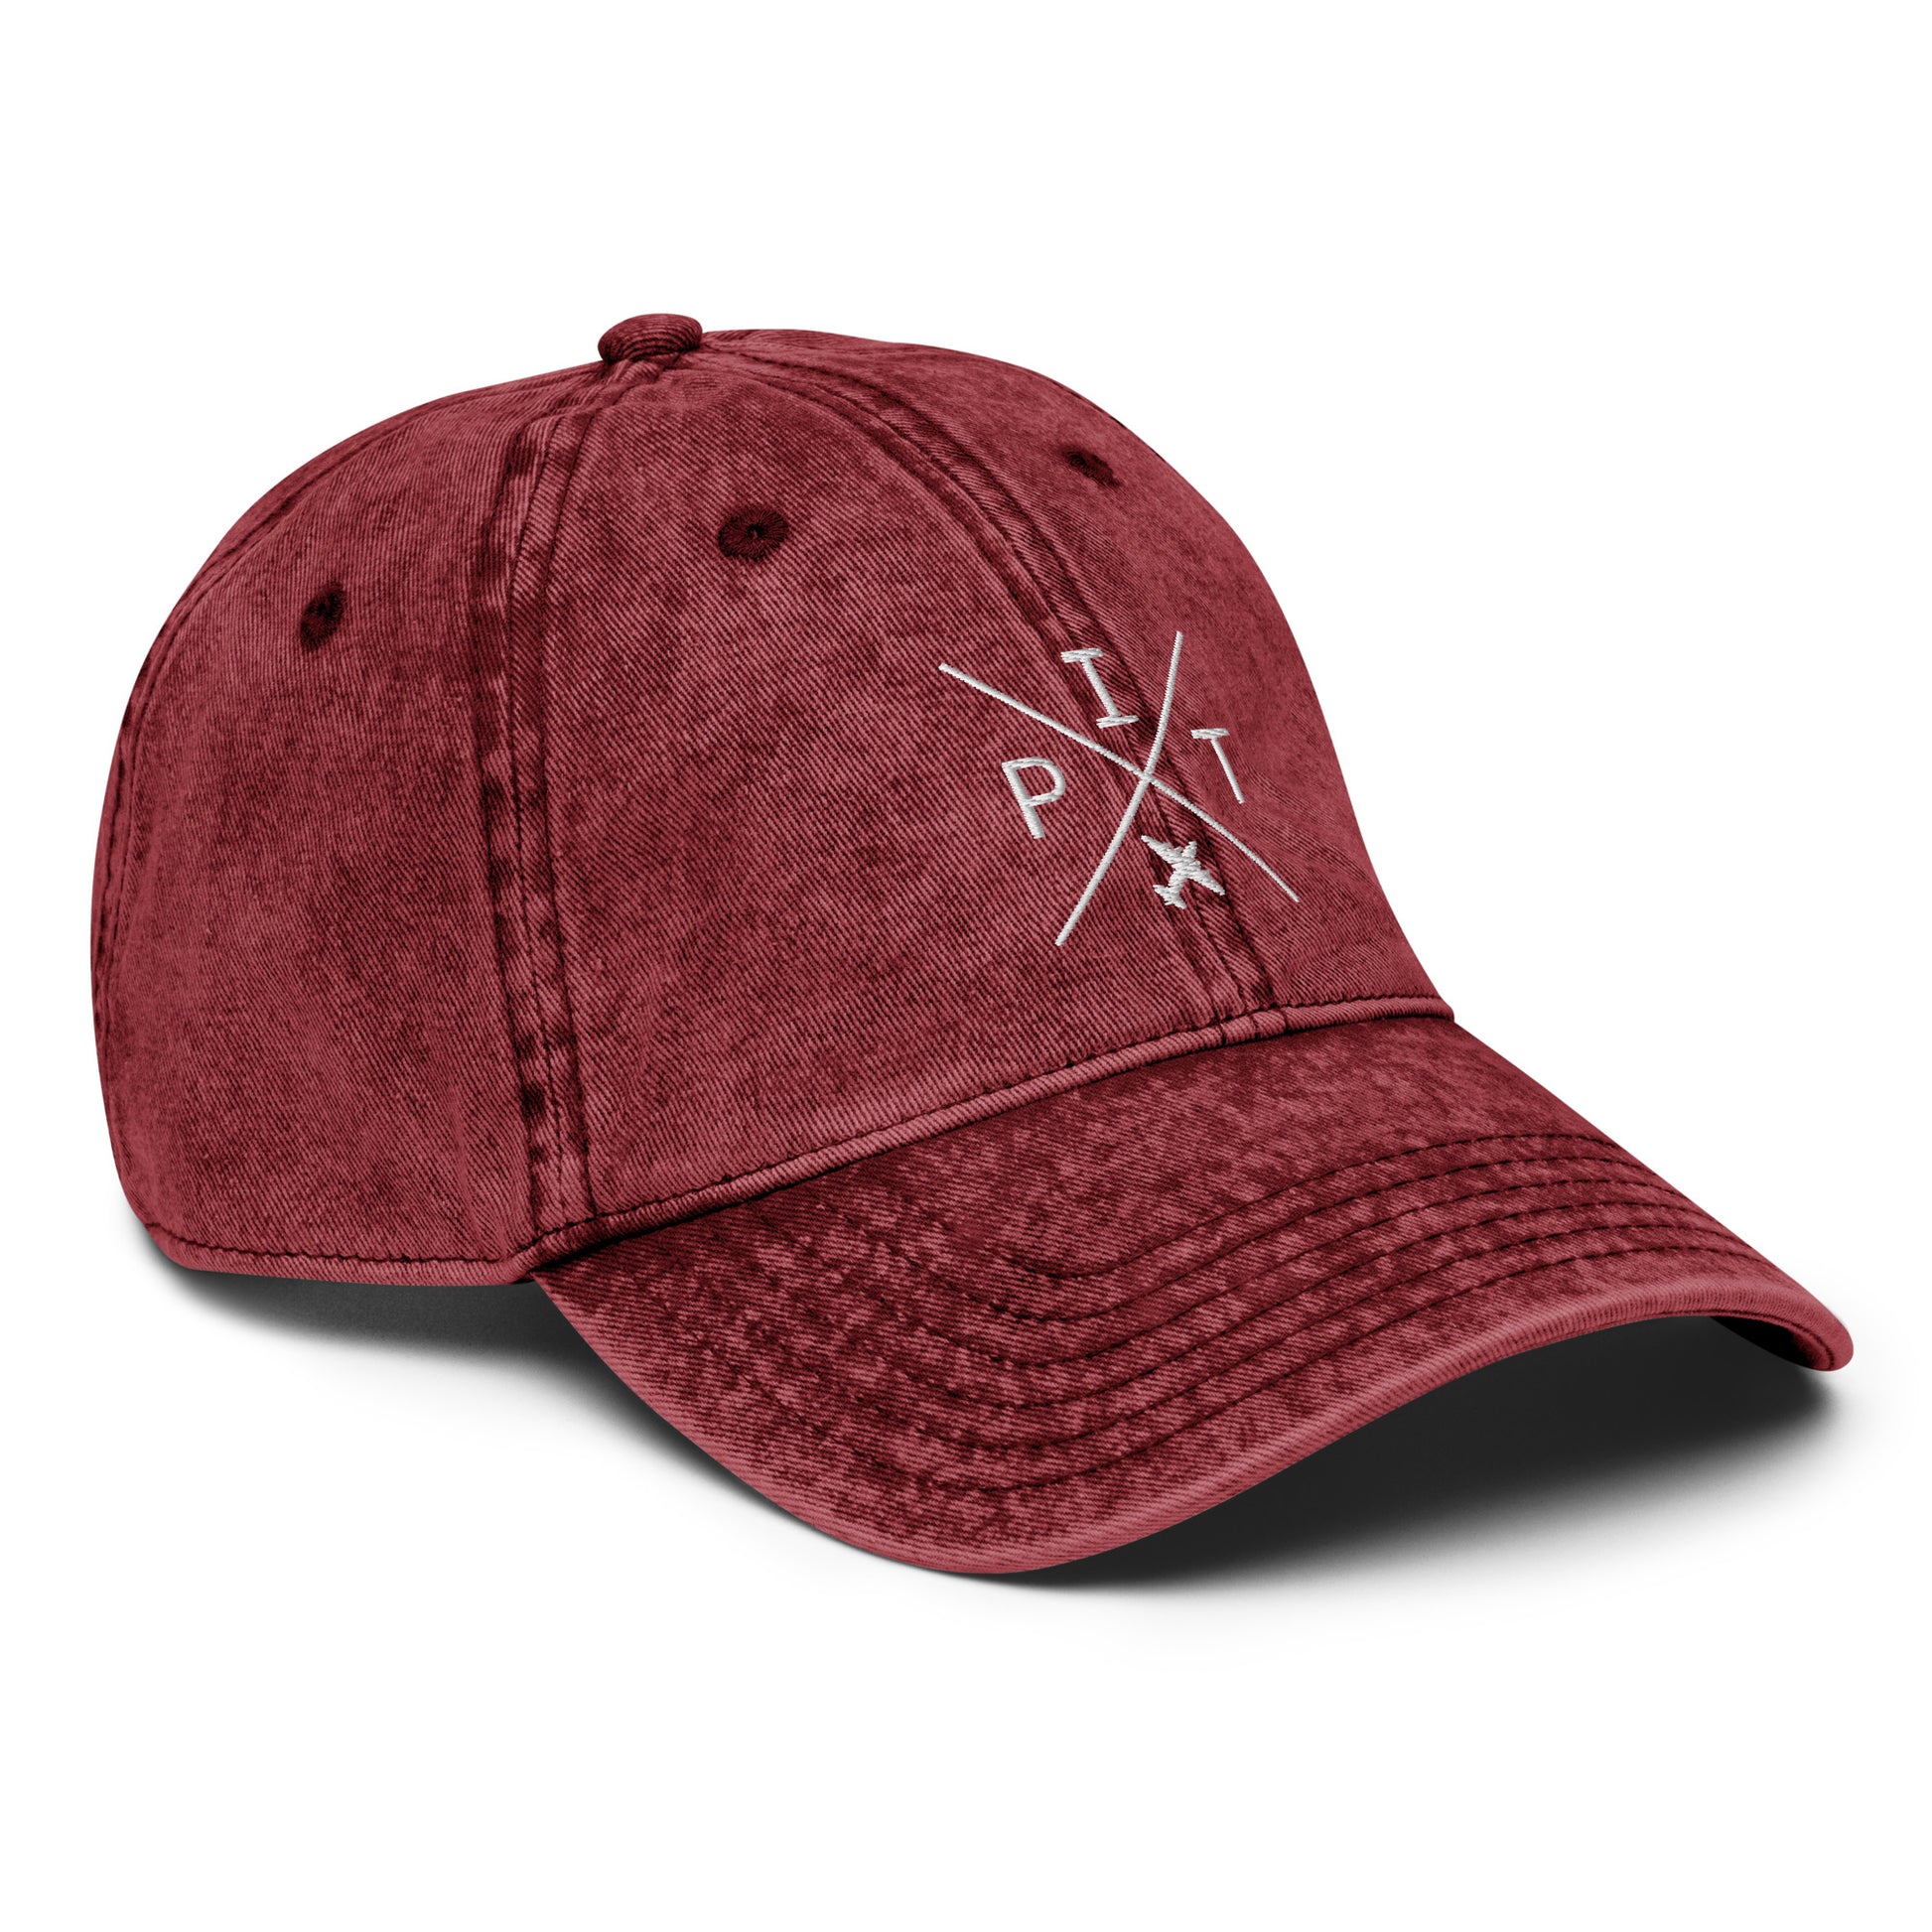 Crossed-X Cotton Twill Cap - White • PIT Pittsburgh • YHM Designs - Image 24